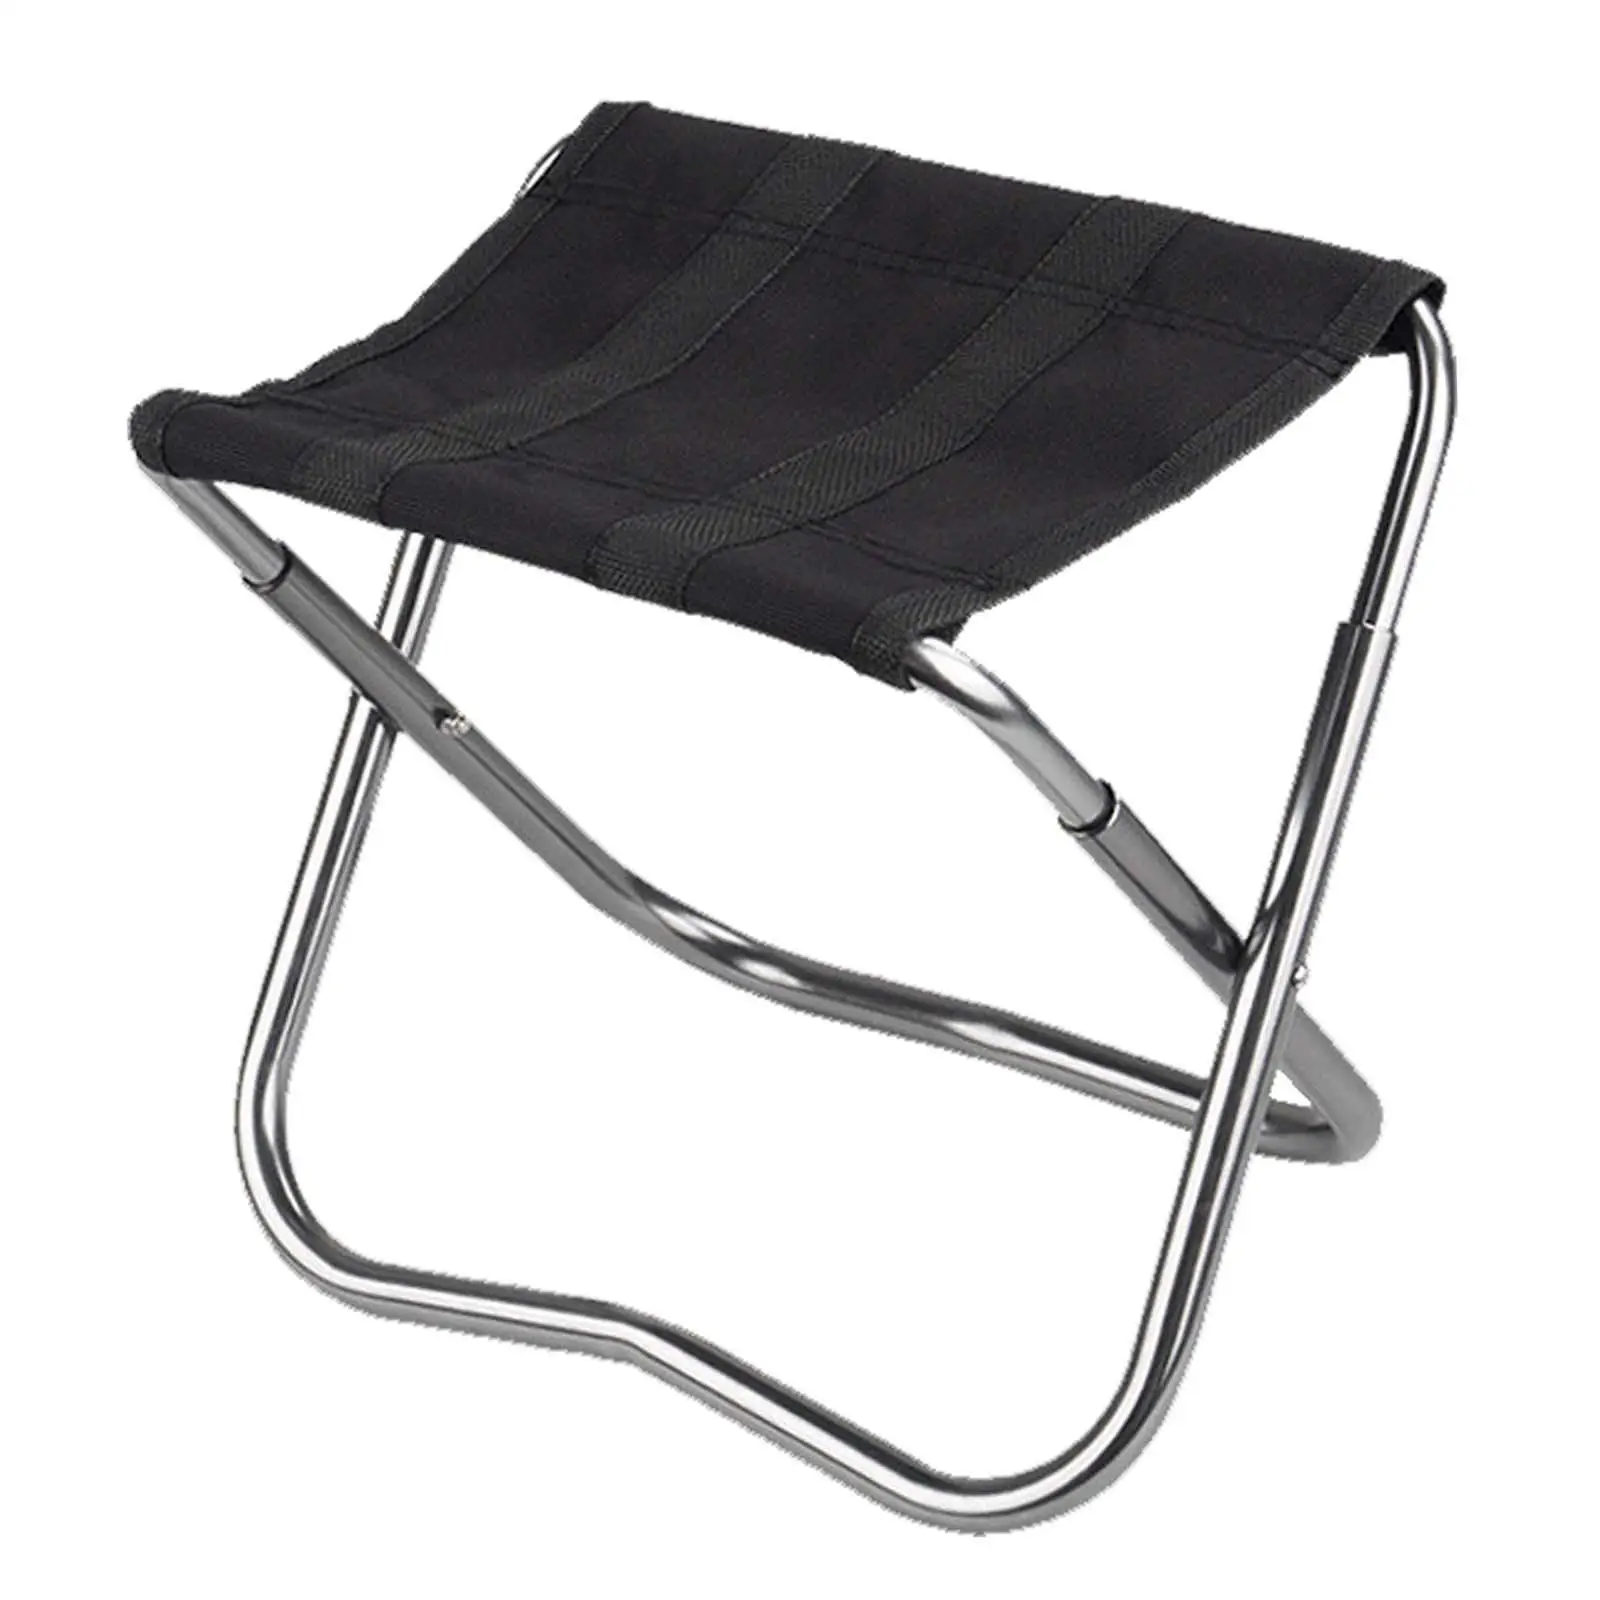 Portable Folding Stool Folding Outdoor Mini Seat Ultralight with Carry Bag Foot